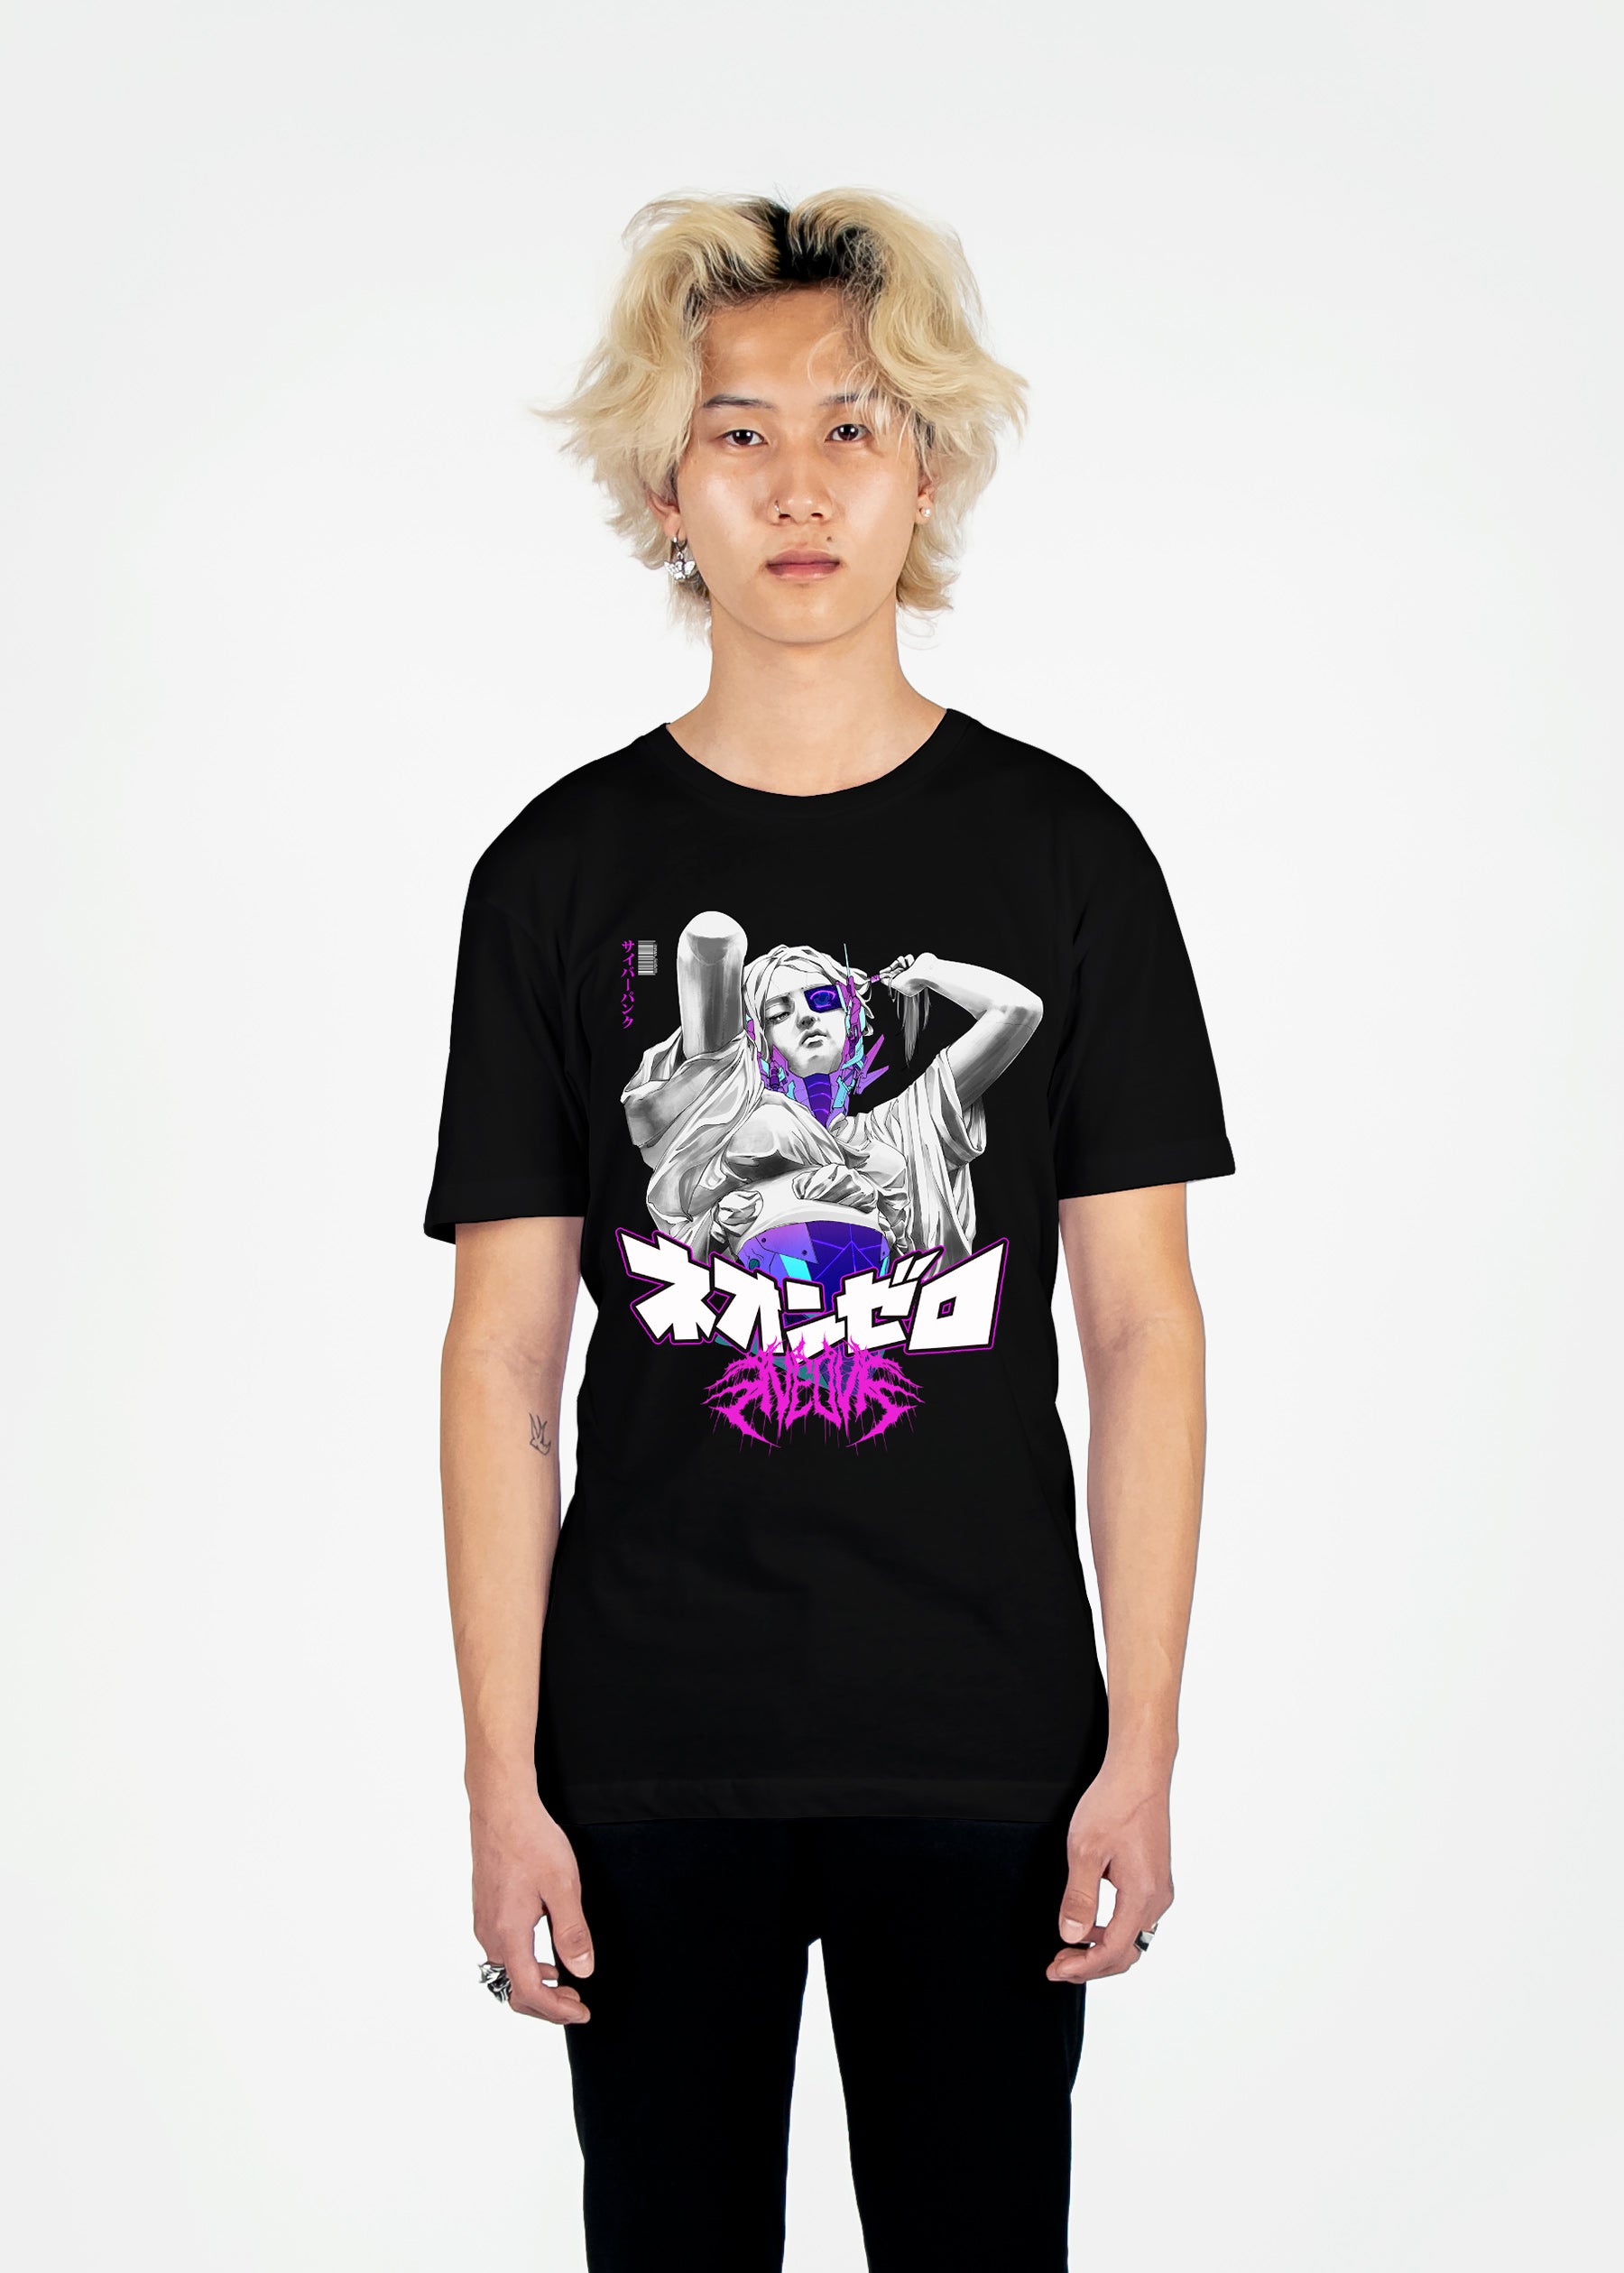 Cybervision Tee